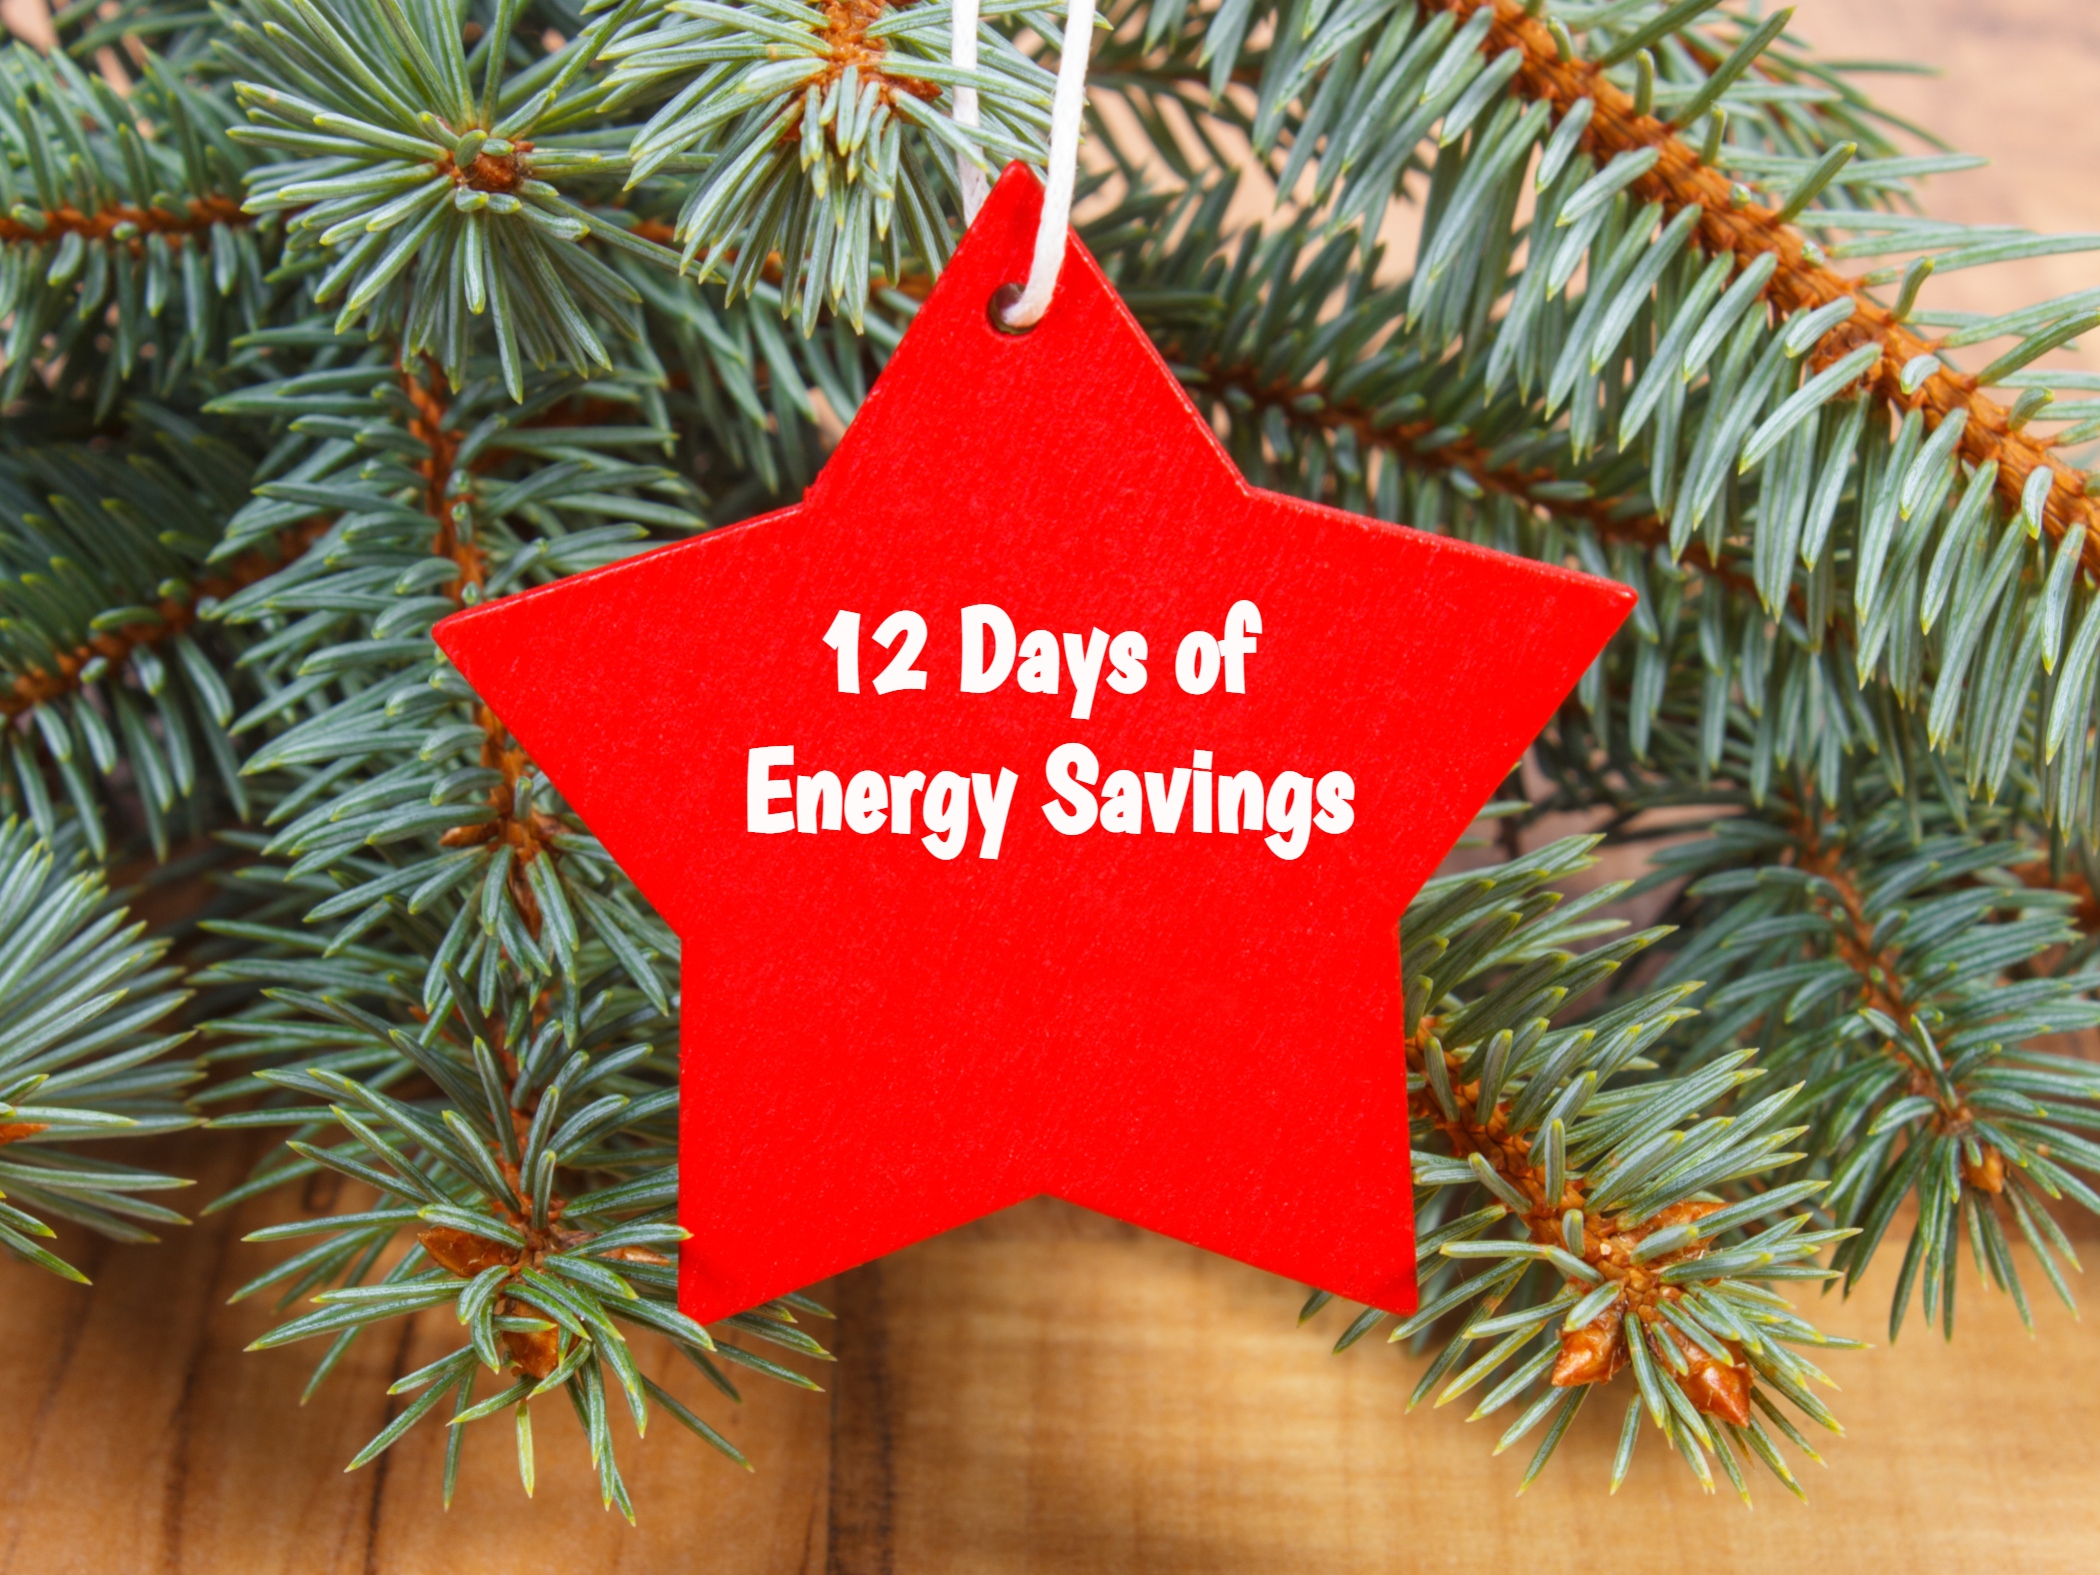 Christmas tree ornament with "12 Days of Energy Savings" written on it.